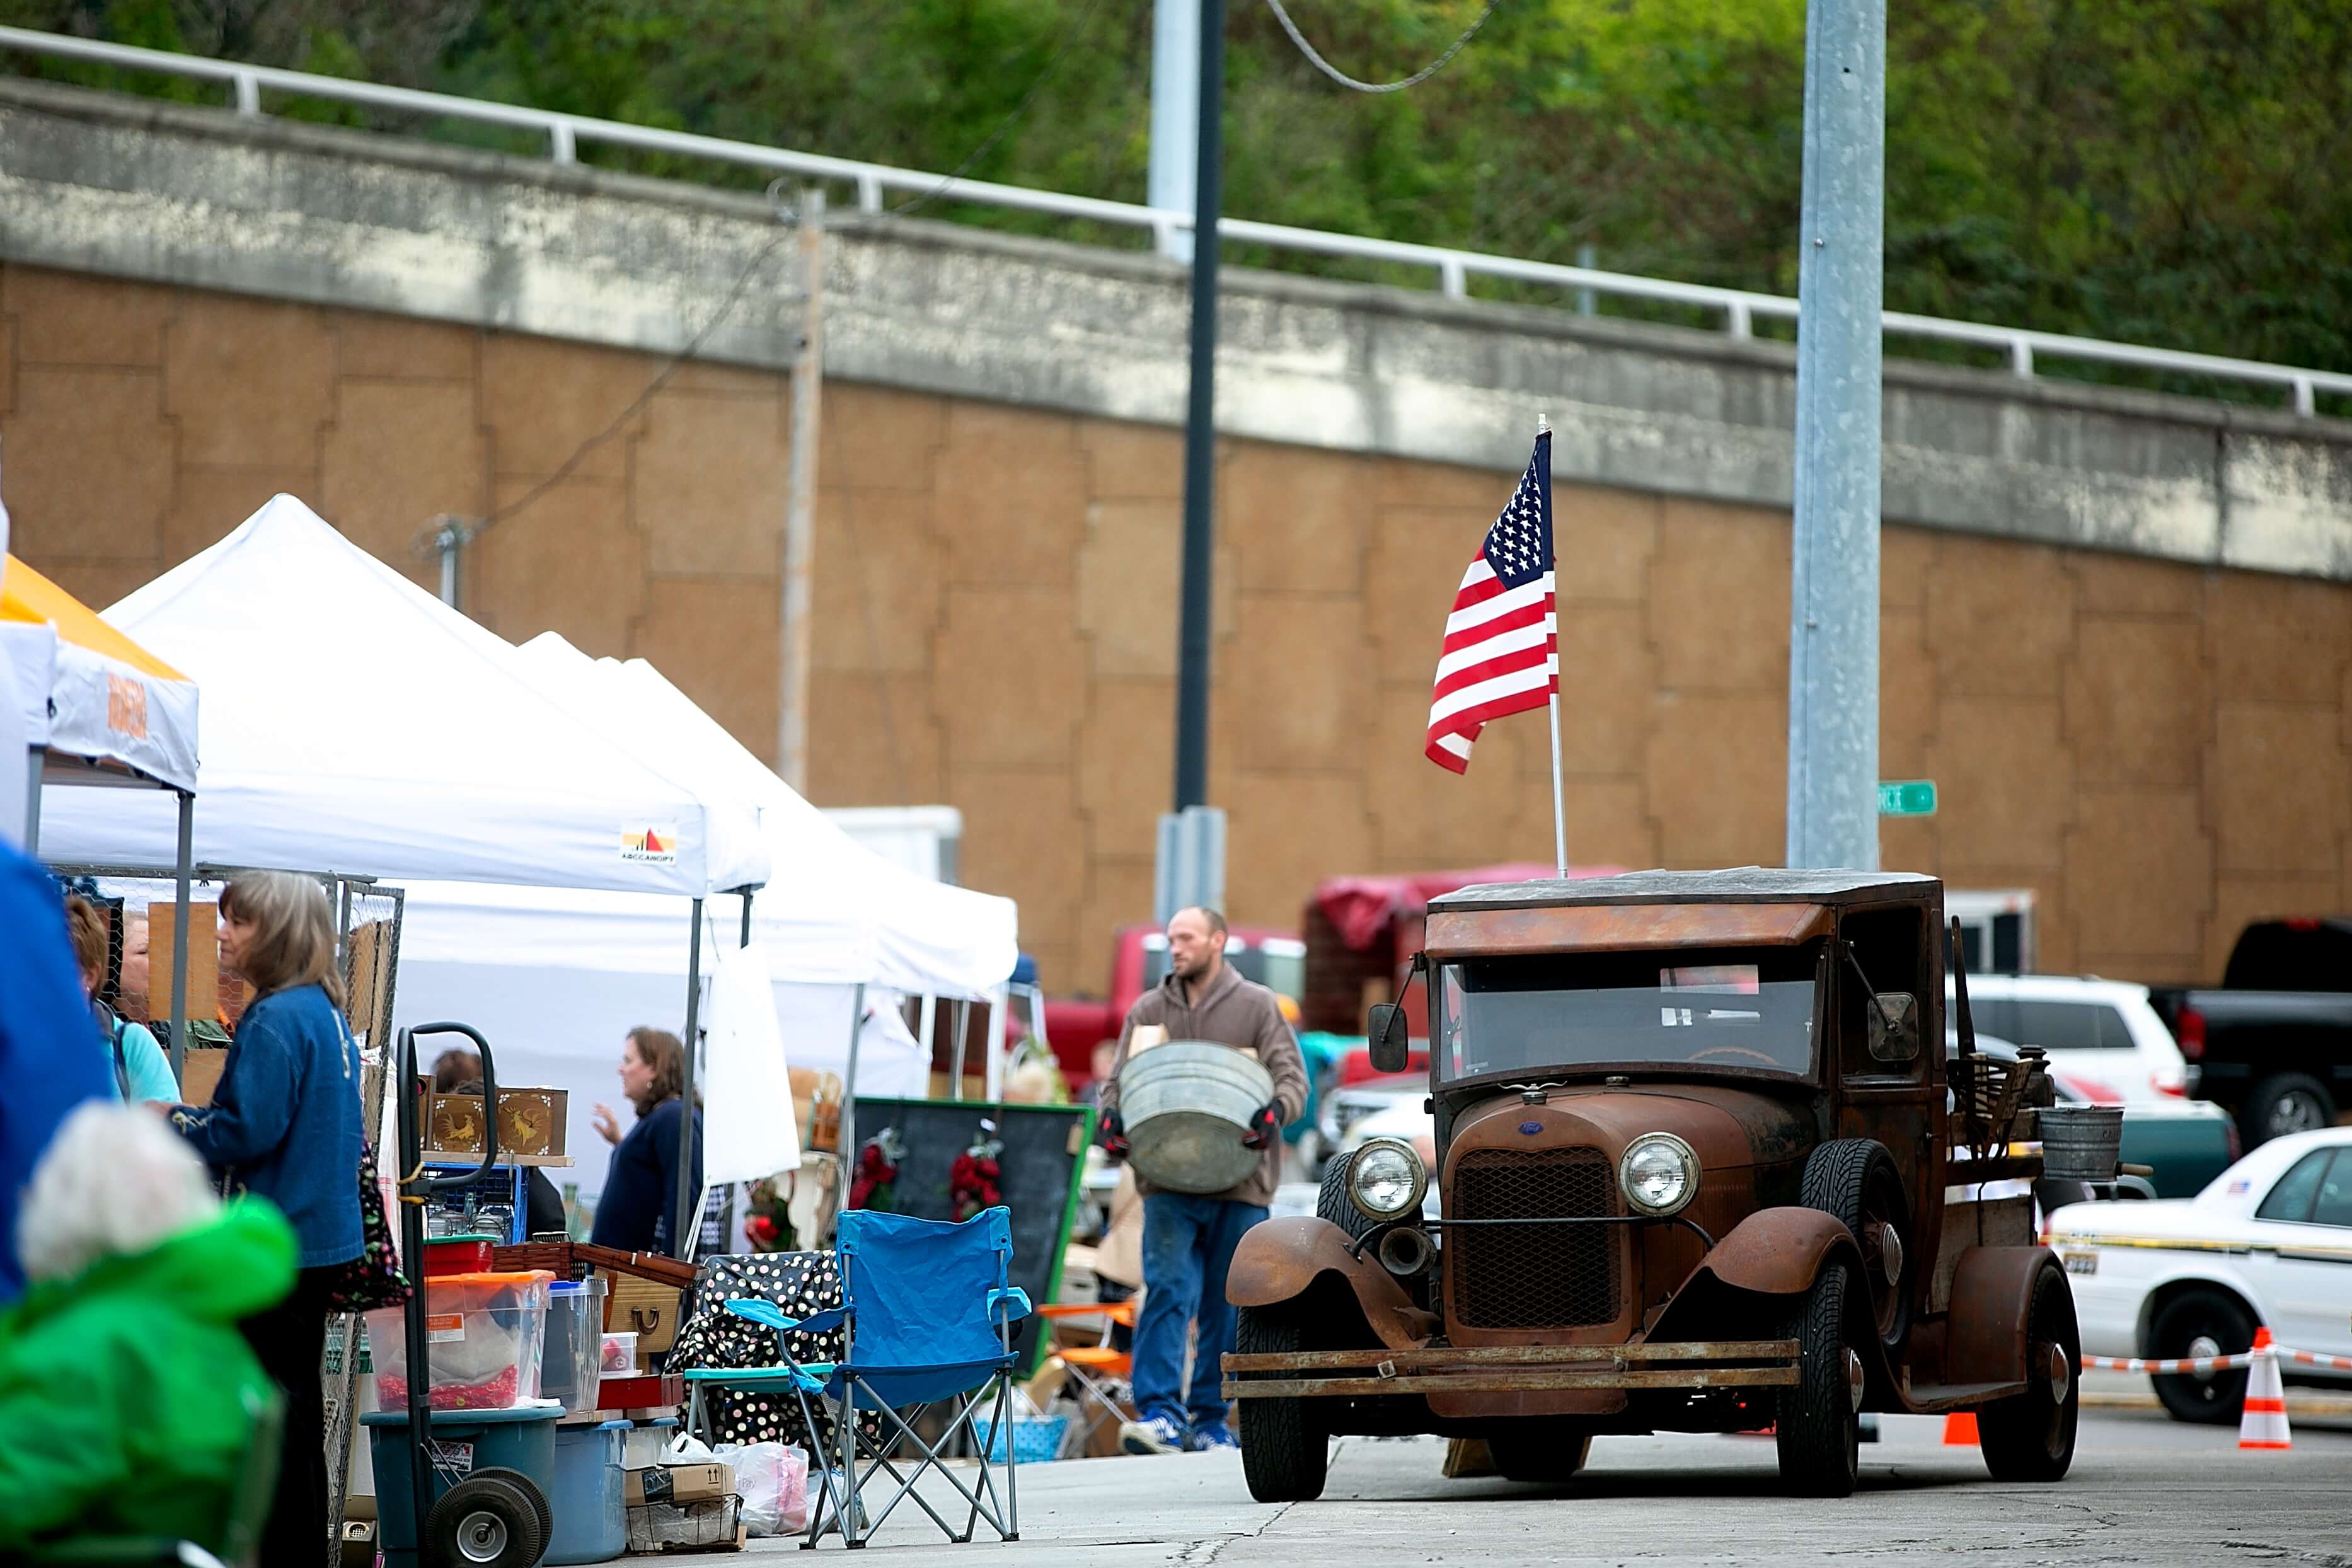 Pictures of the 19th Annual Clinch River Fall Antique Festival